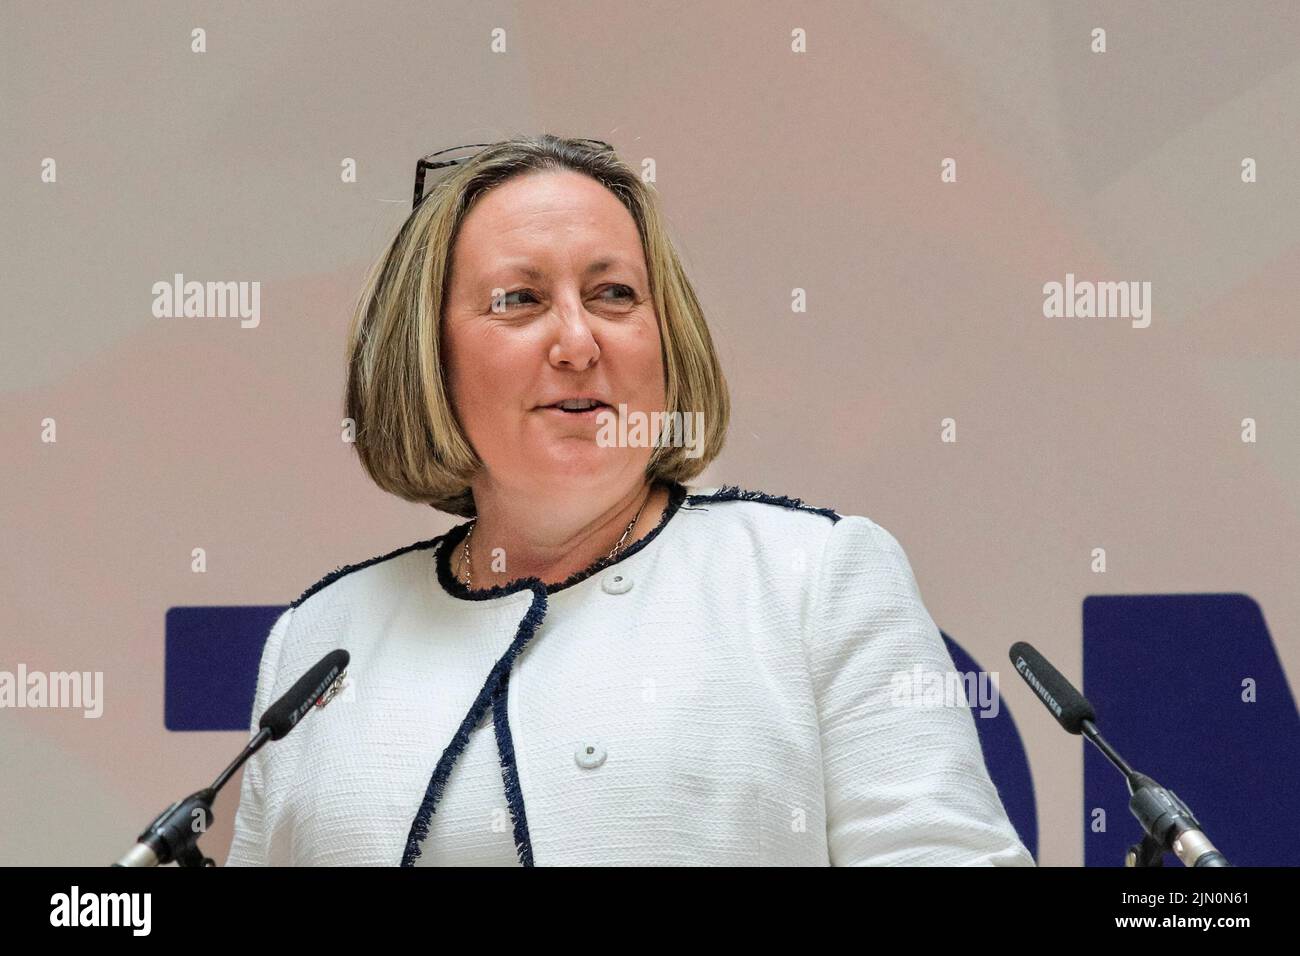 Anne-Marie Trevelyan, MP,  British politician Conservative Party,  Secretary of State for International Trade, speaking at a leadership launch, London Stock Photo